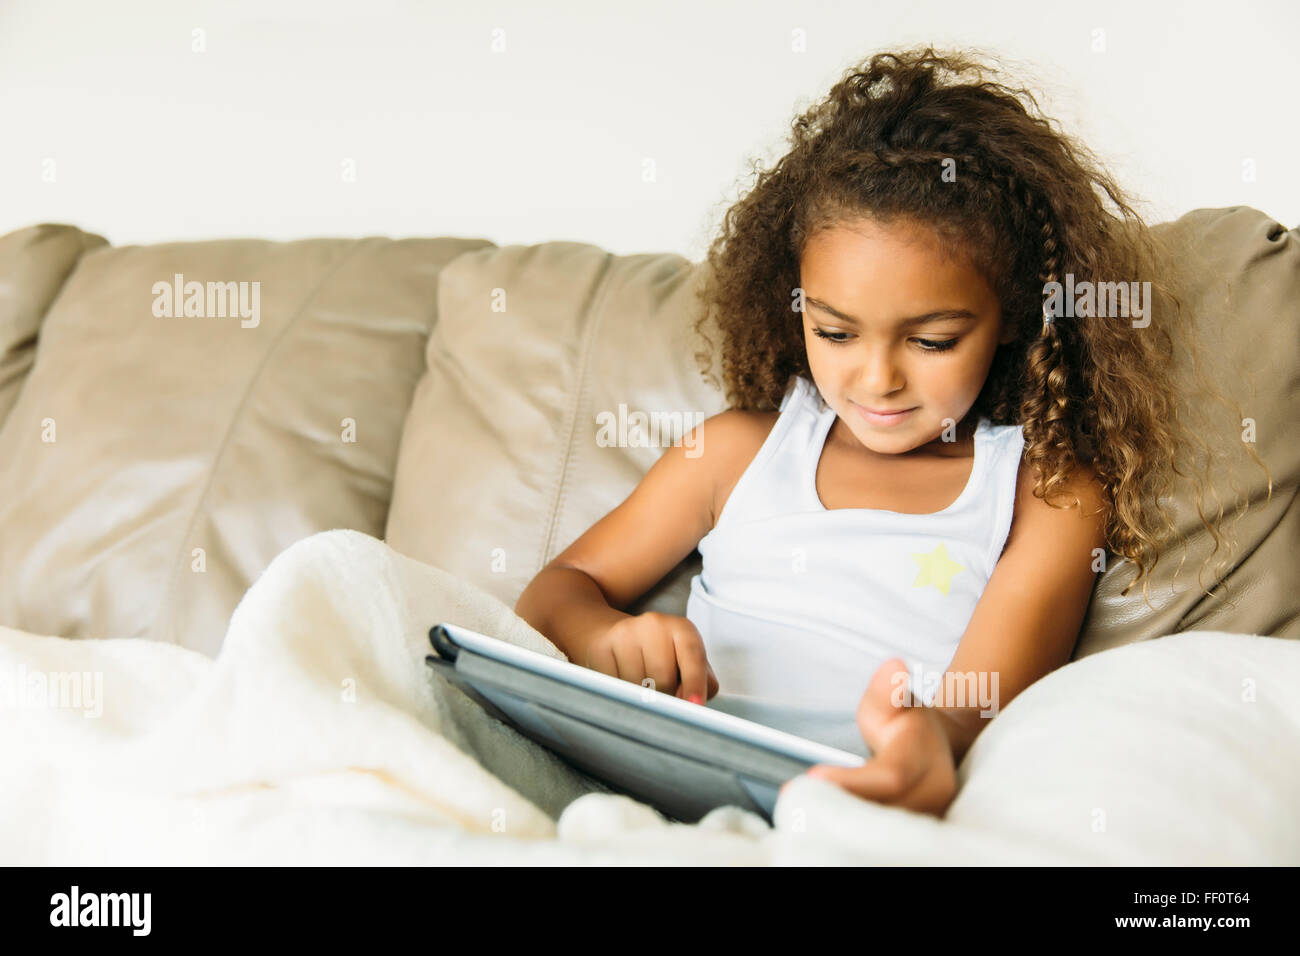 Mixed Race girl sitting on sofa Banque D'Images